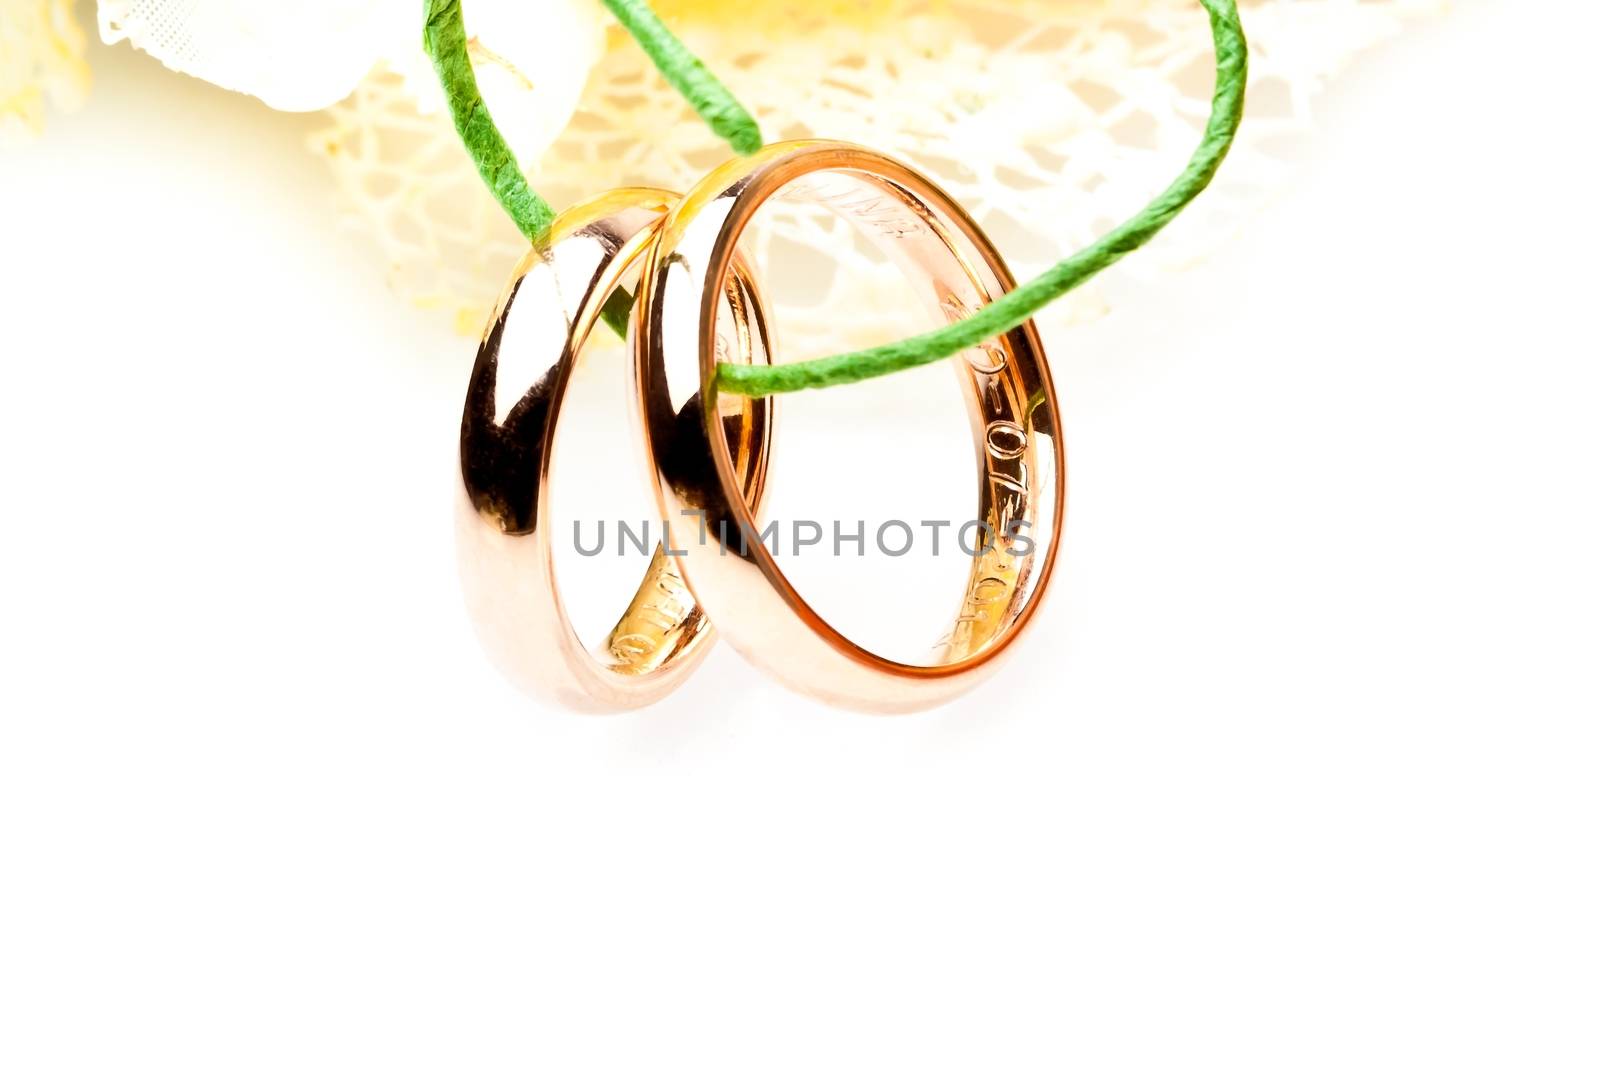 gold wedding rings near flowers with space for text on white background